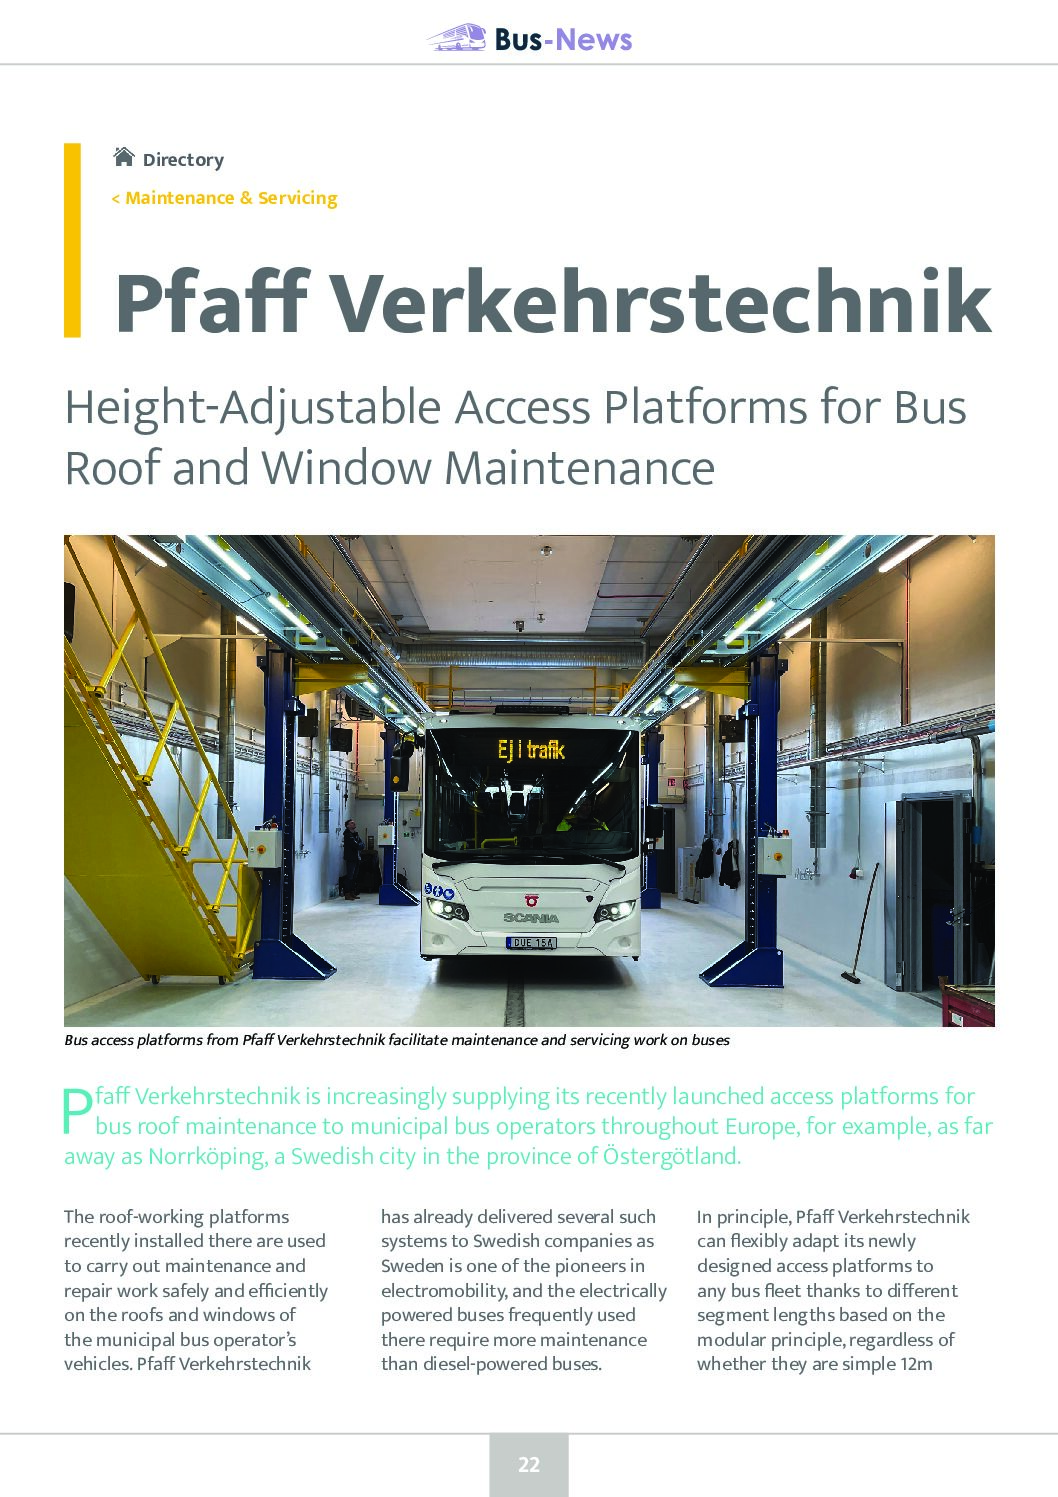 Adjustable Access Platforms for Bus Roof and Window Maintenance